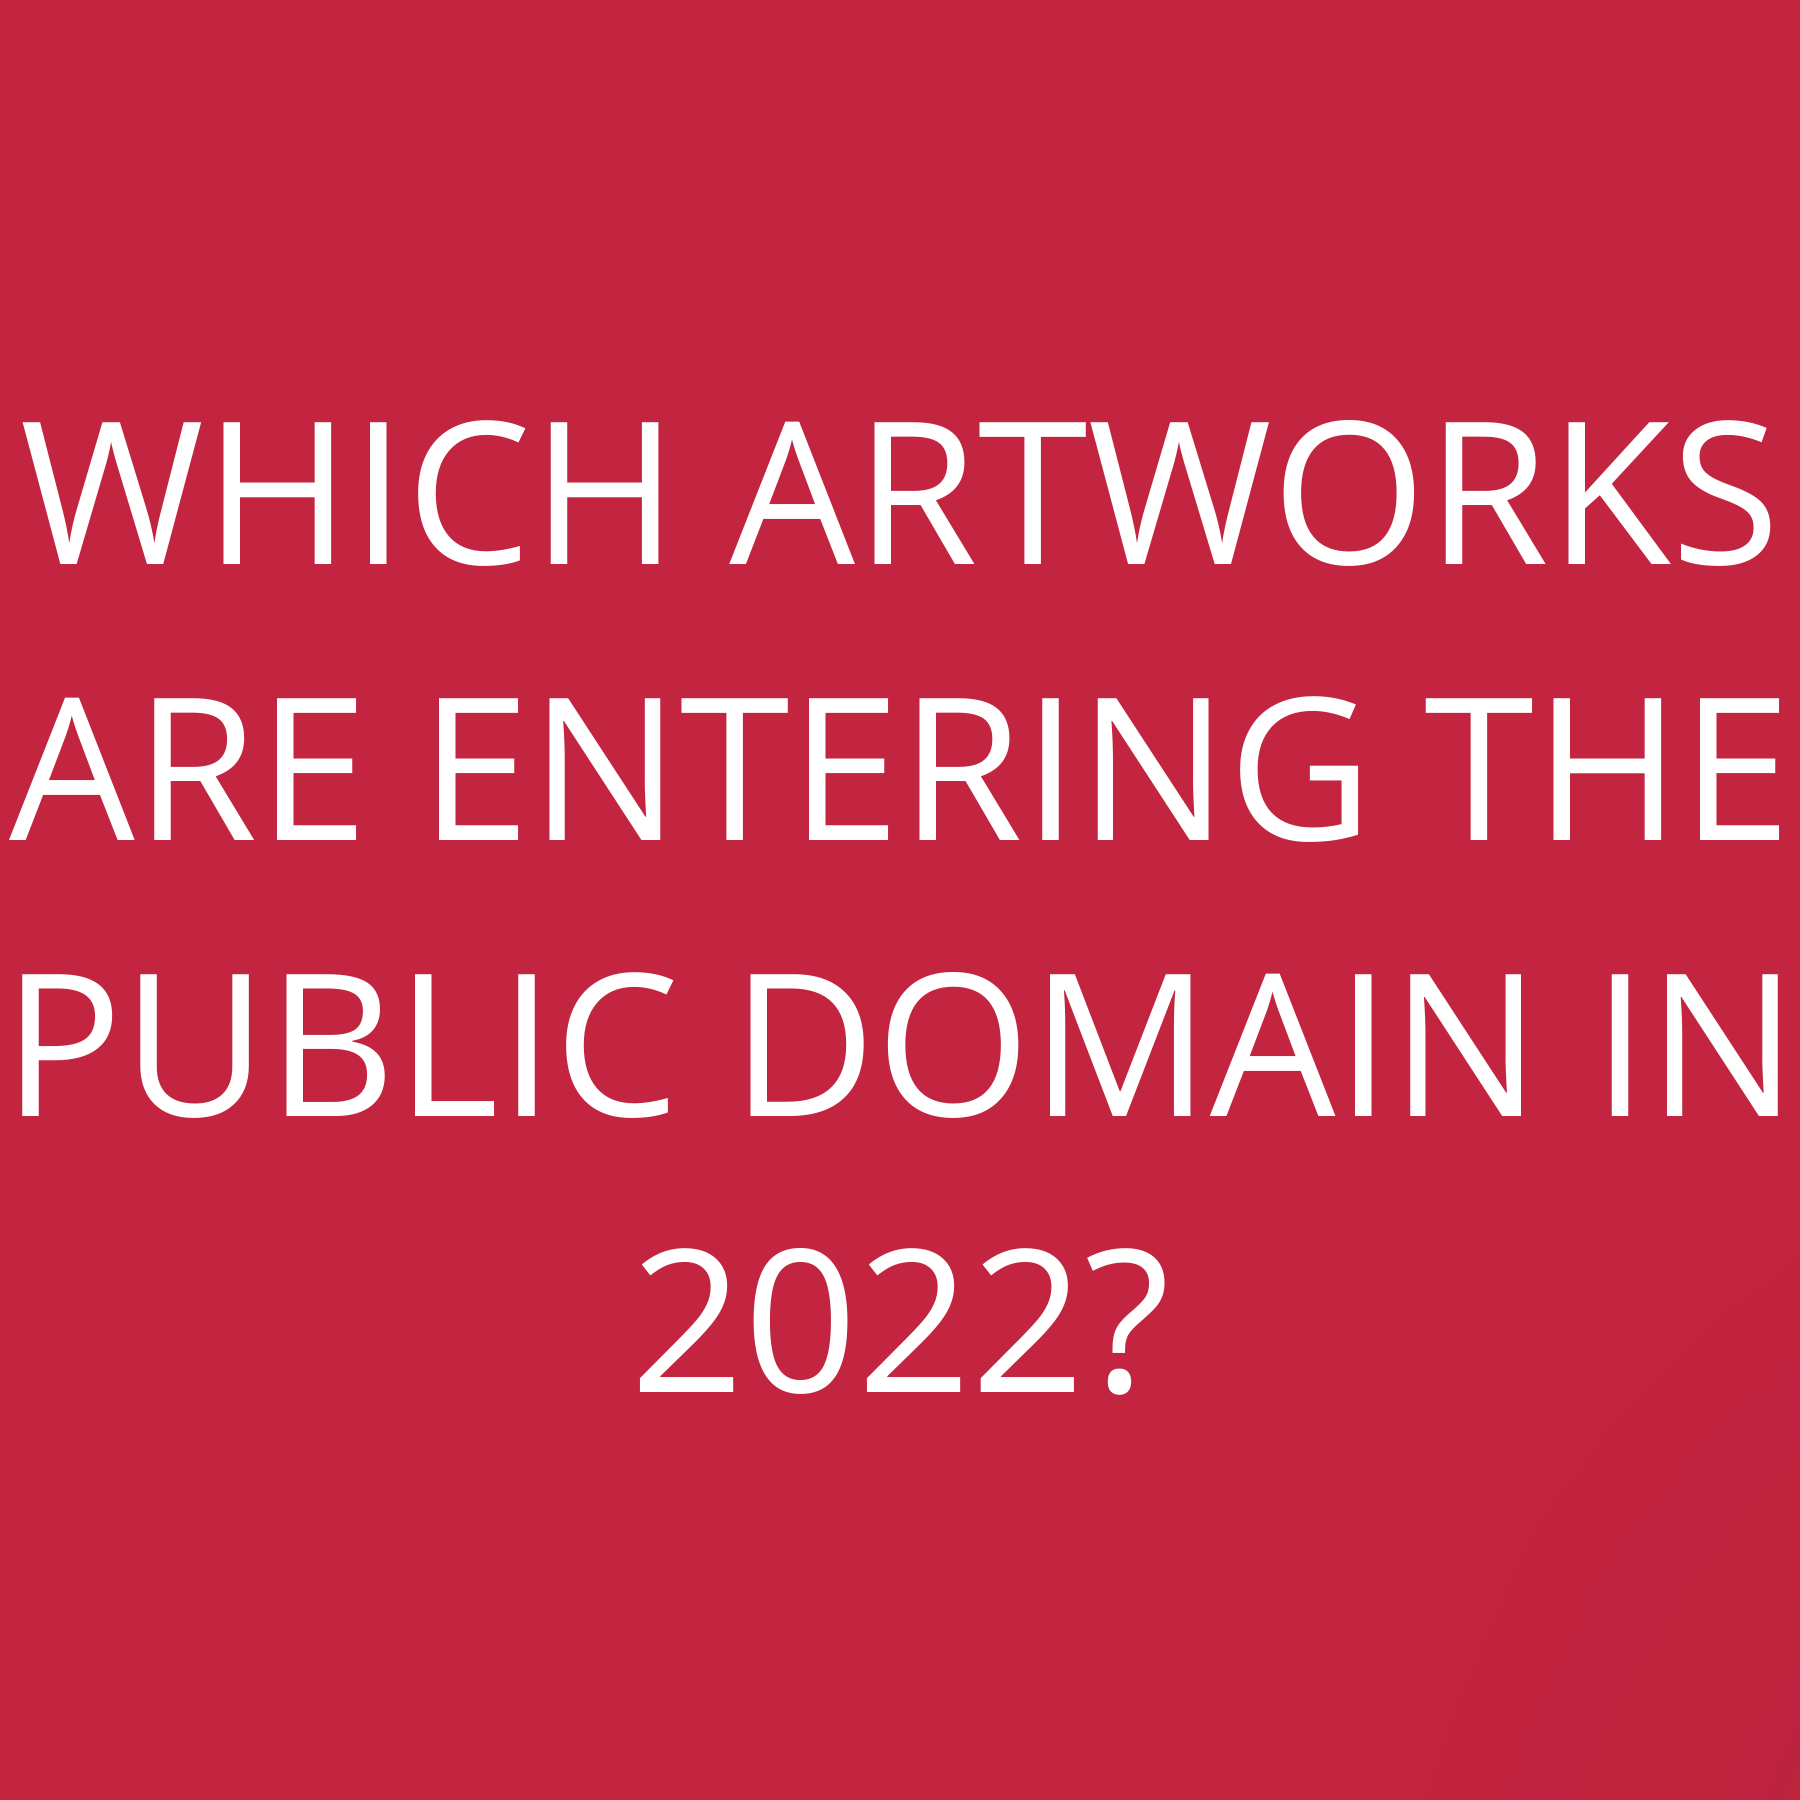 Which artworks are entering the public domain in 2022?